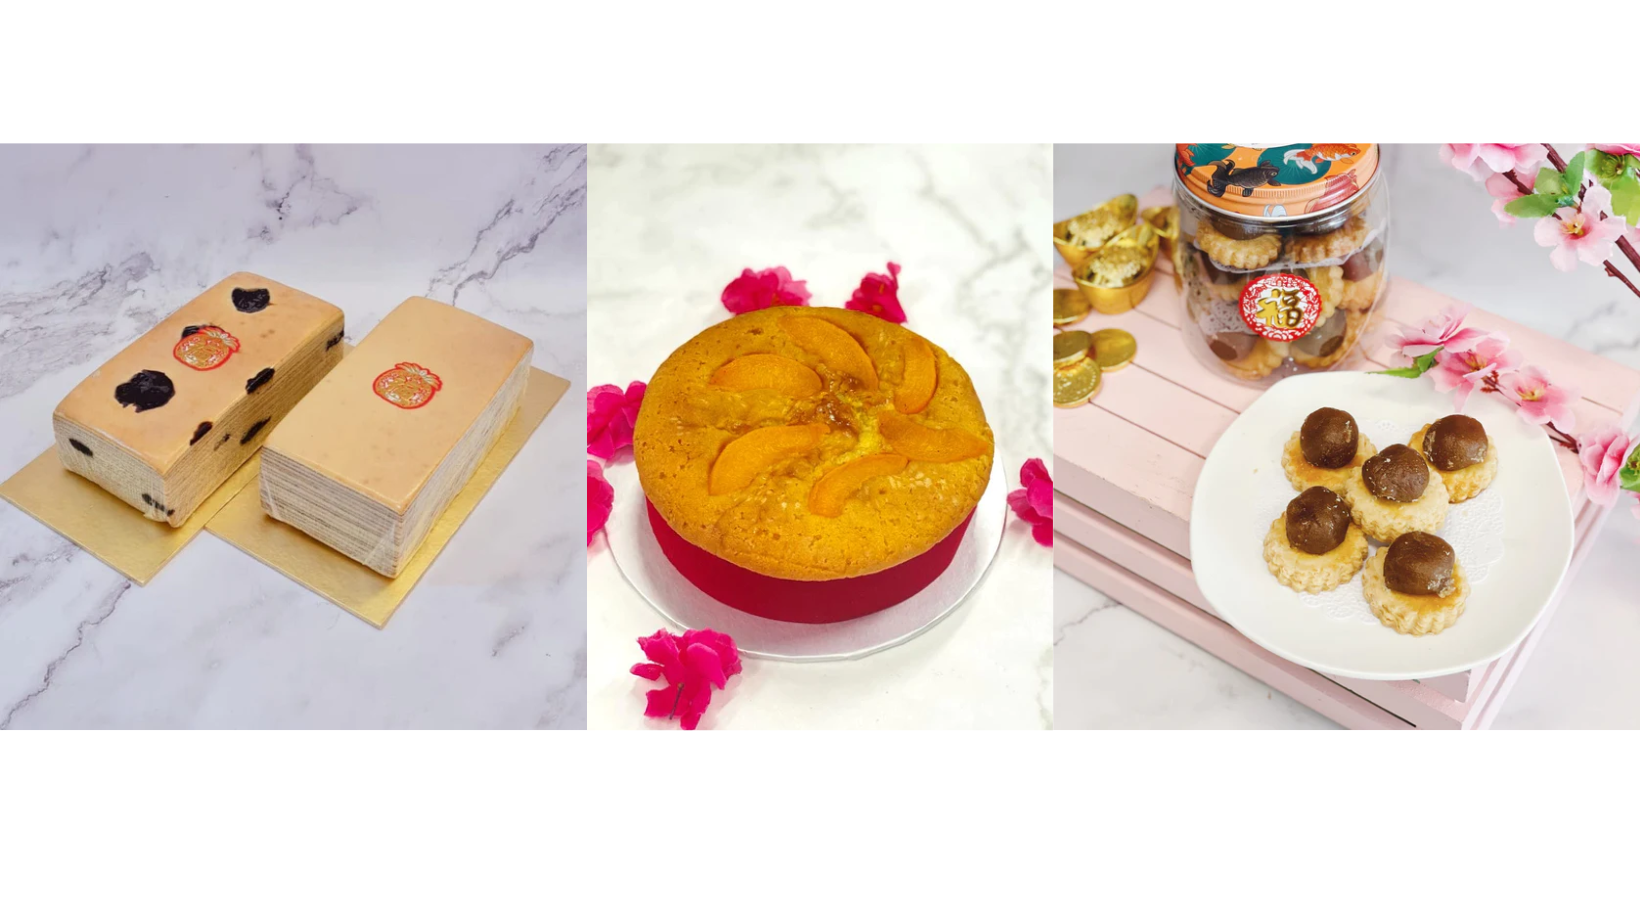 Singapore's City Hall CNY Goodies and Cakes: Fast and Convenient Delivery